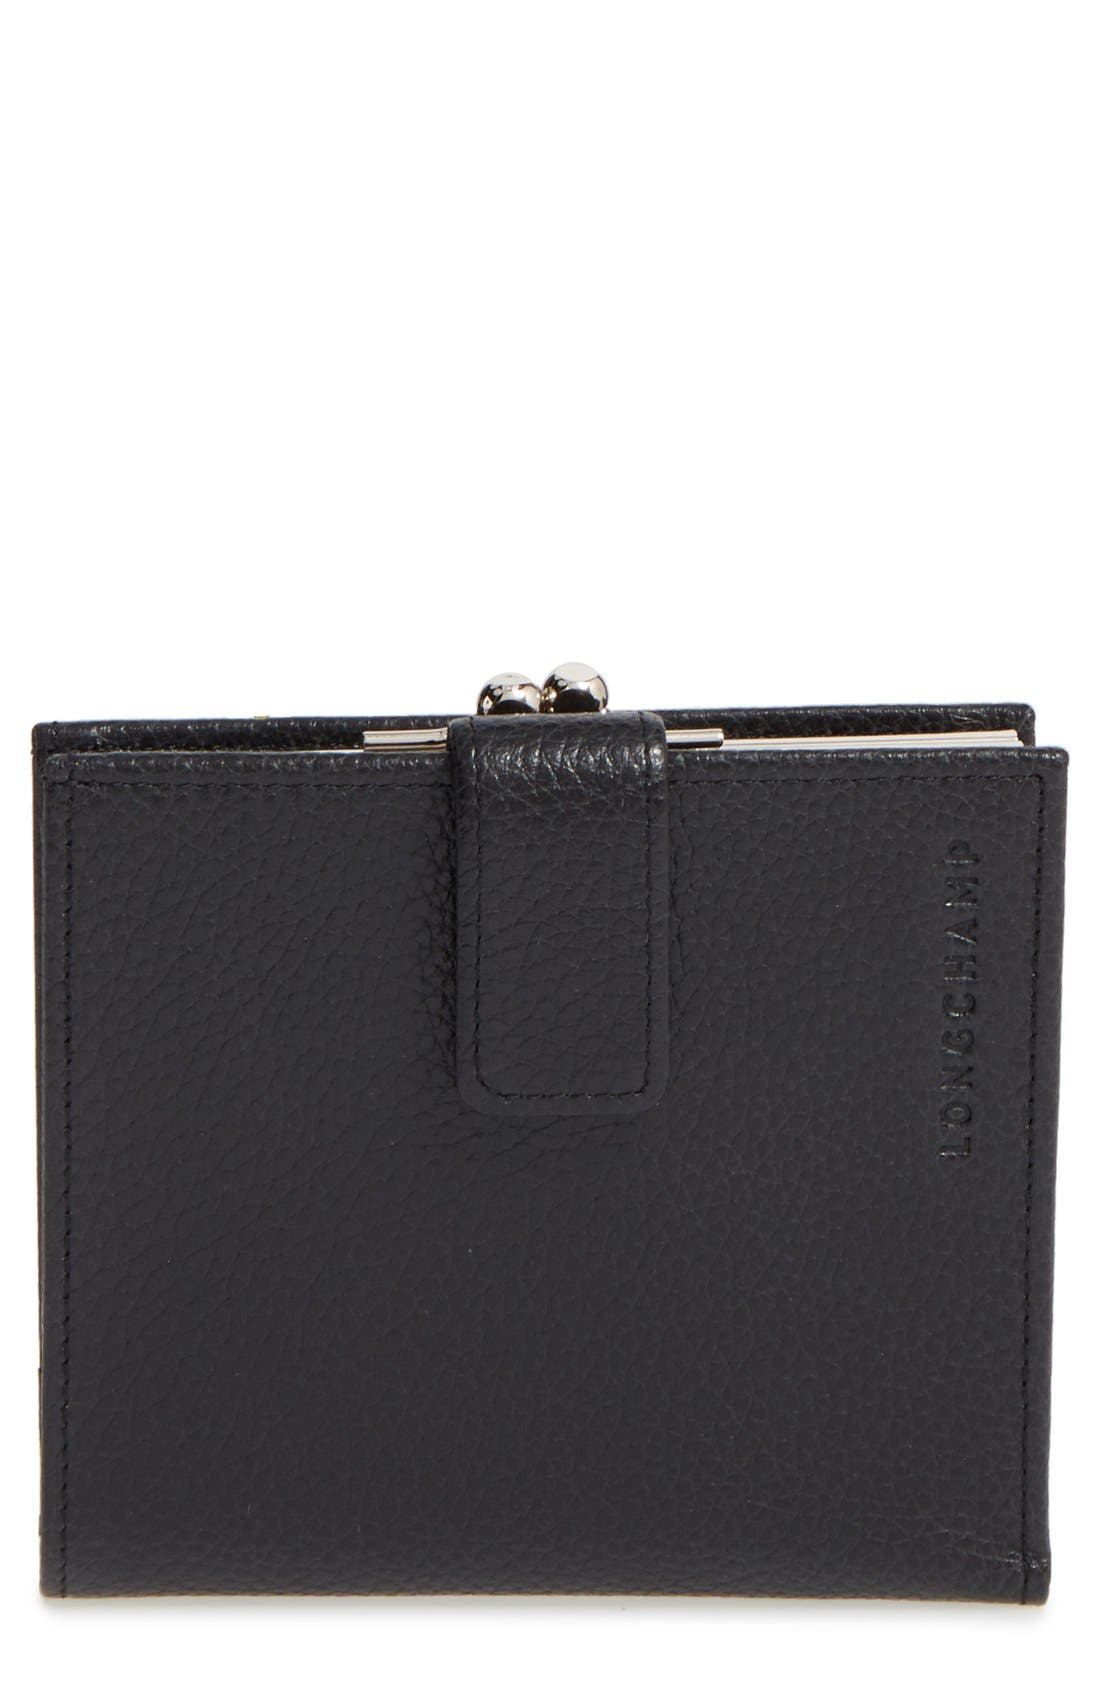 Longchamp 'Le Foulonne' Pebbled Leather Wallet in Black at Nordstrom